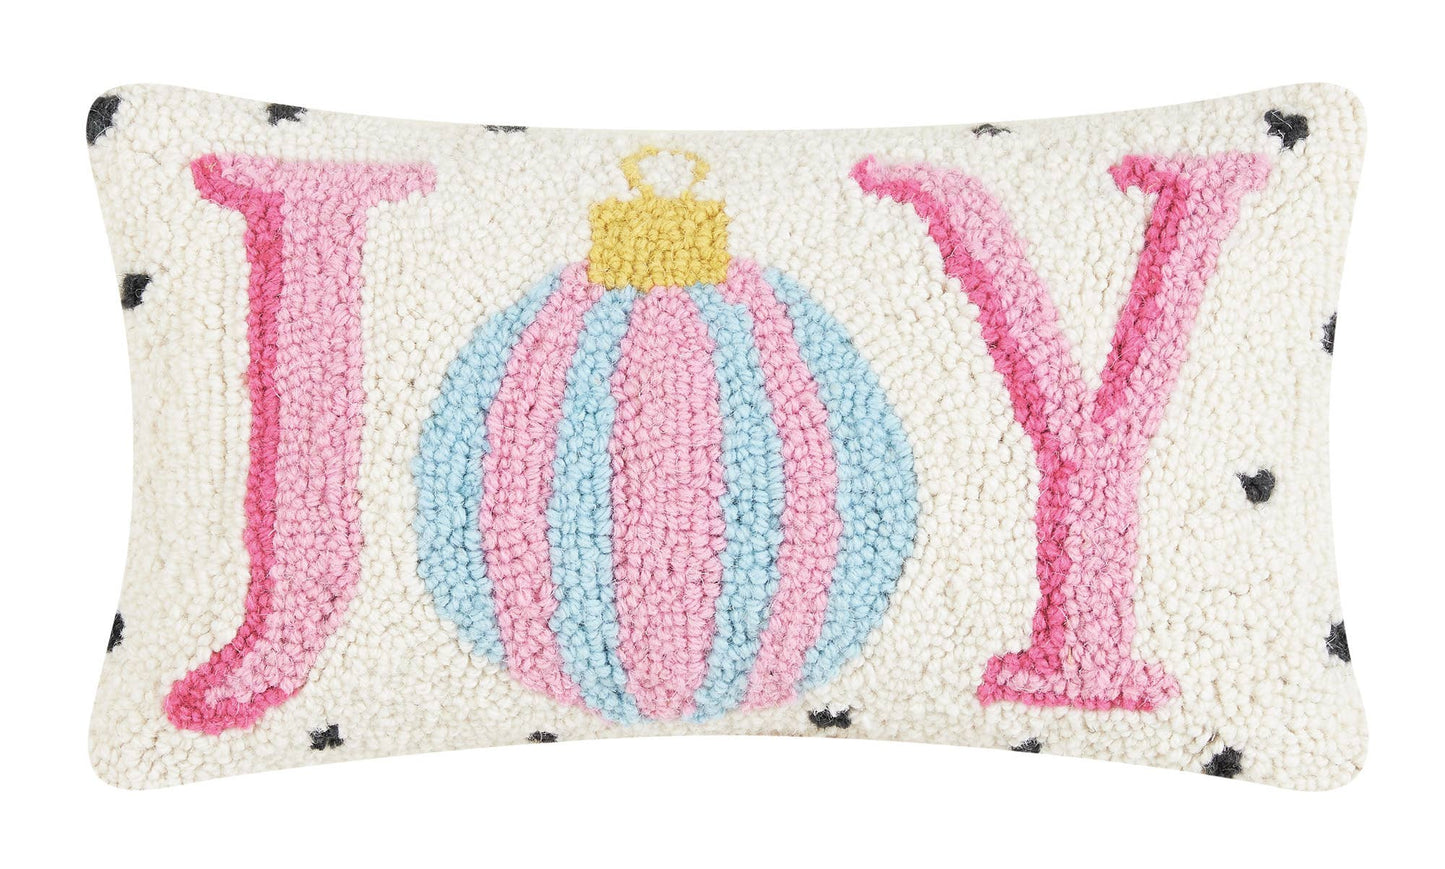 Spotted Holiday Joy Hook Pillow